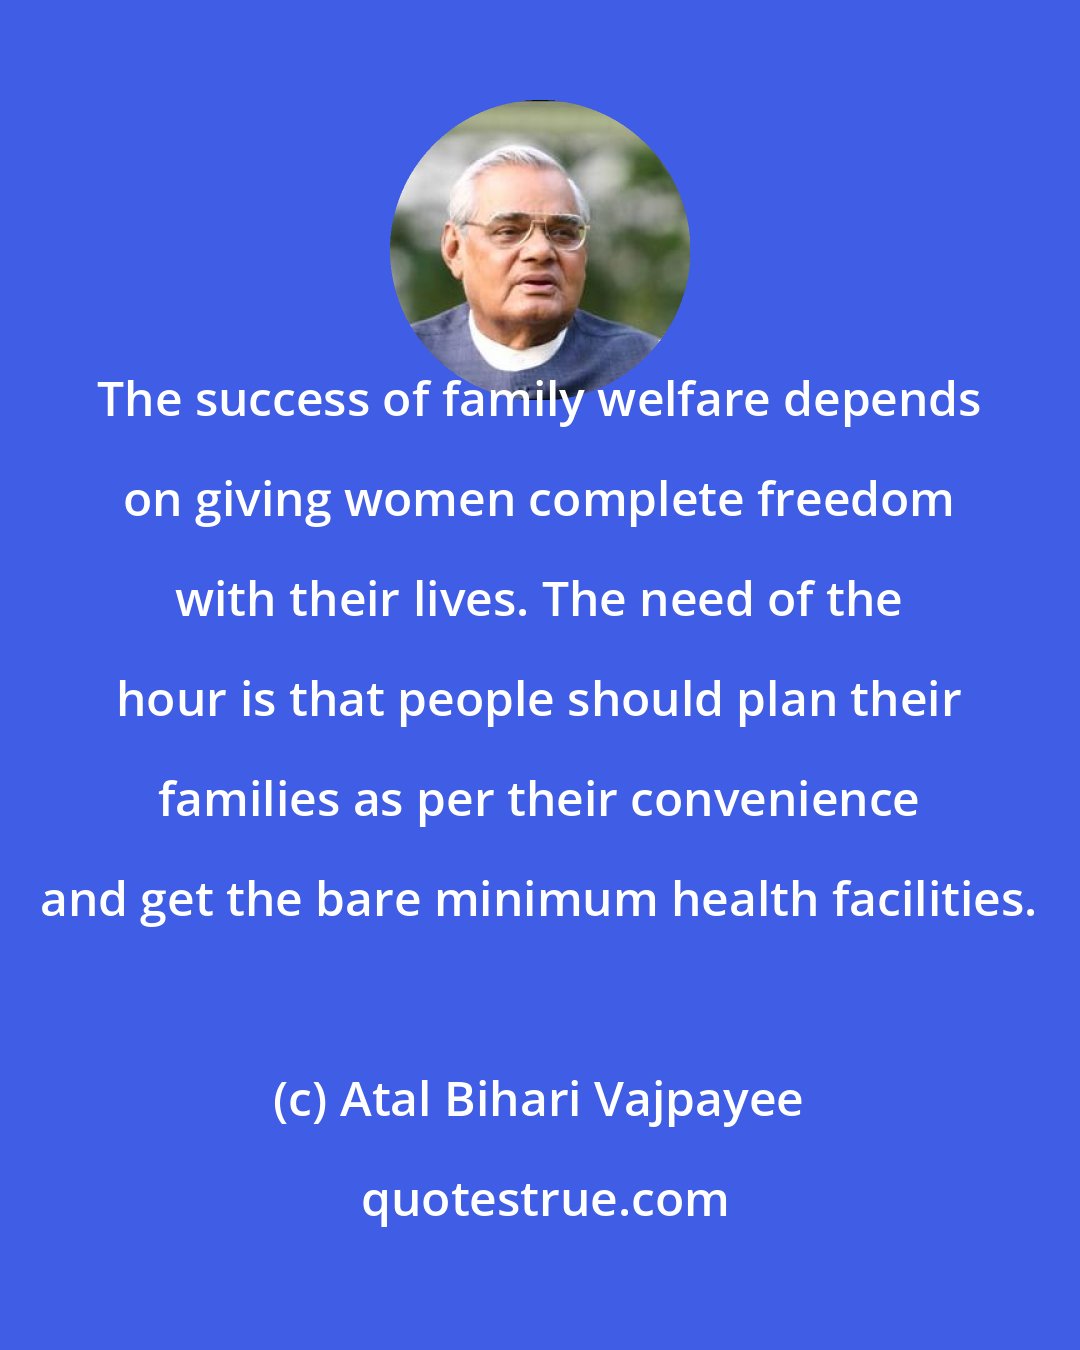 Atal Bihari Vajpayee: The success of family welfare depends on giving women complete freedom with their lives. The need of the hour is that people should plan their families as per their convenience and get the bare minimum health facilities.